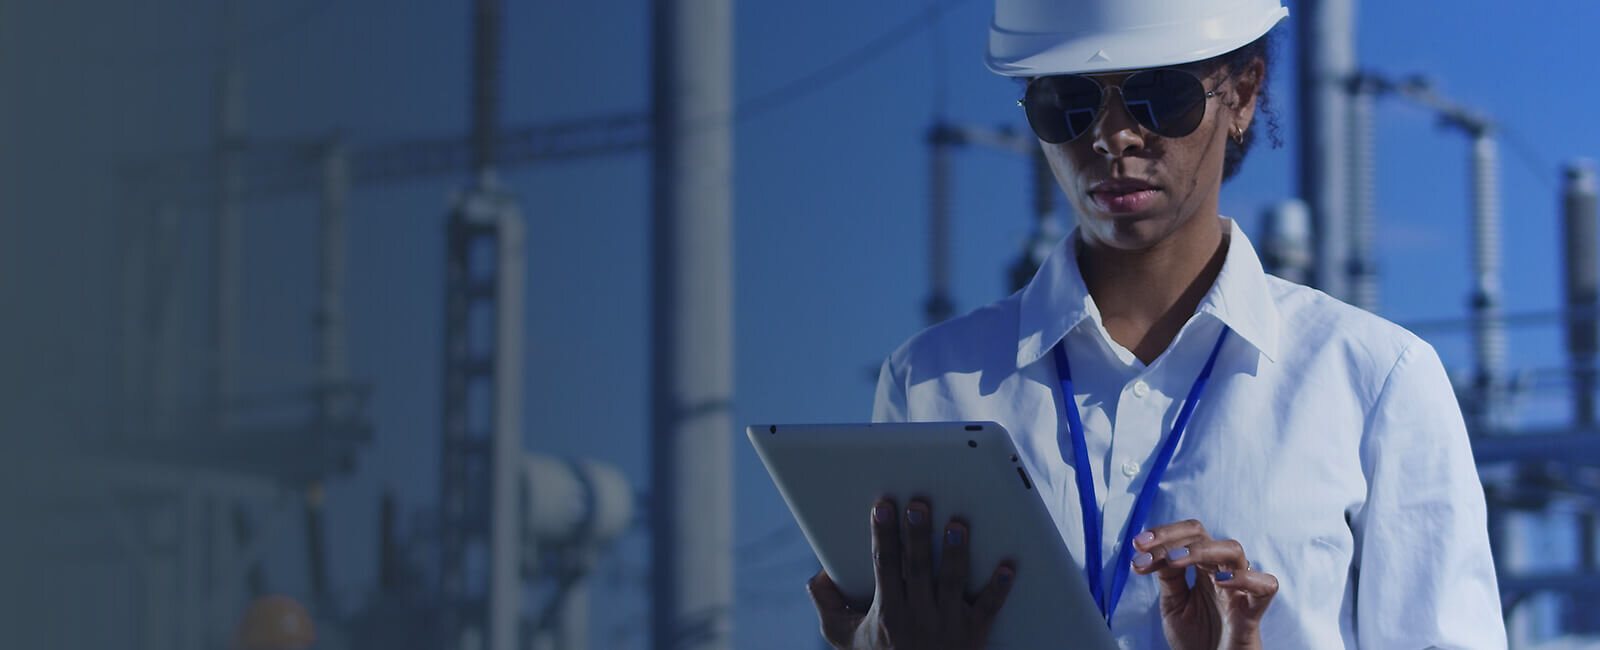 Accelerate time to value with AVEVA Industrial Cloud Platform